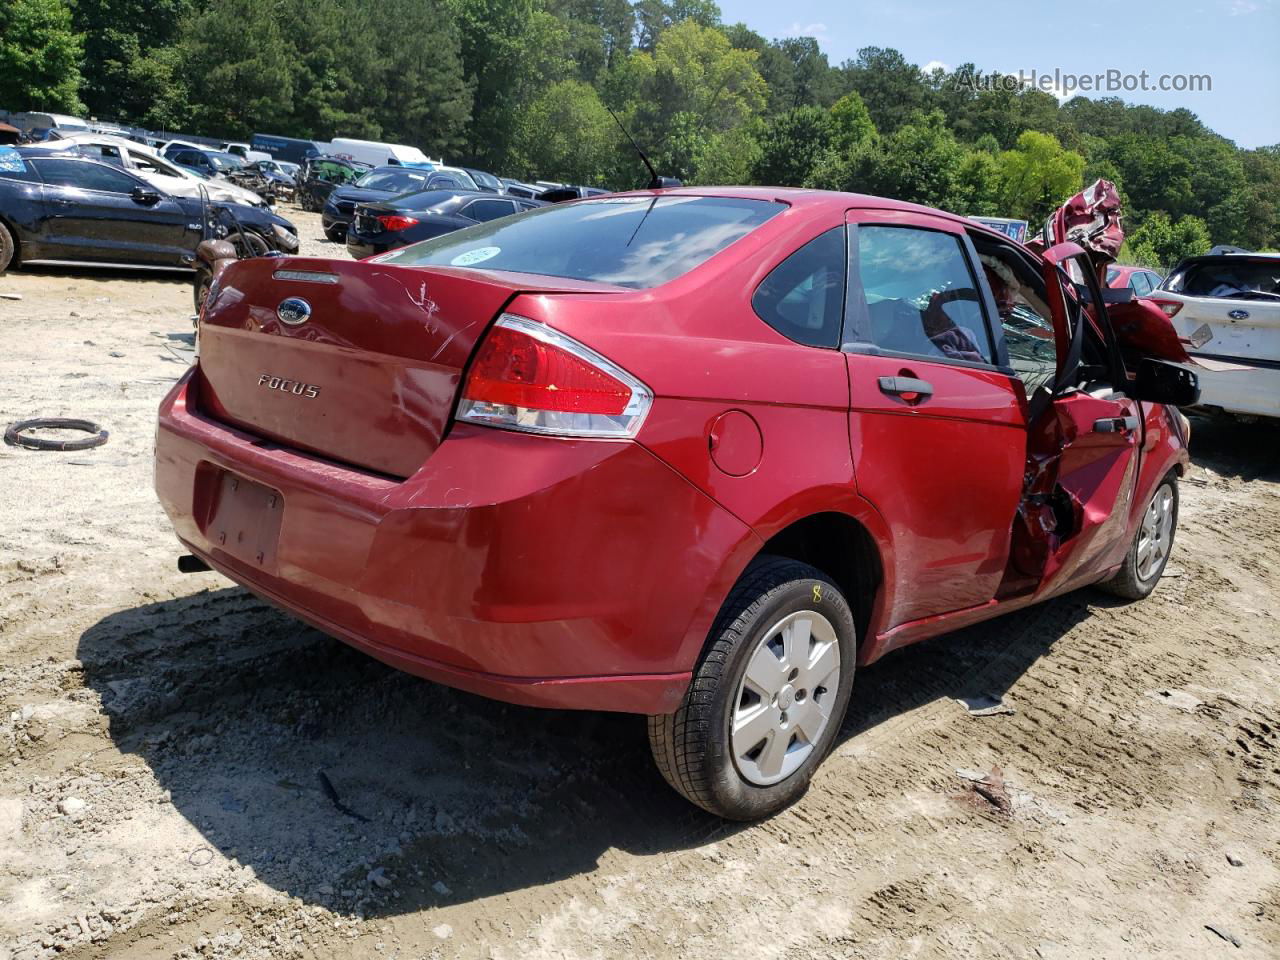 2011 Ford Focus S Red vin: 1FAHP3ENXBW110144